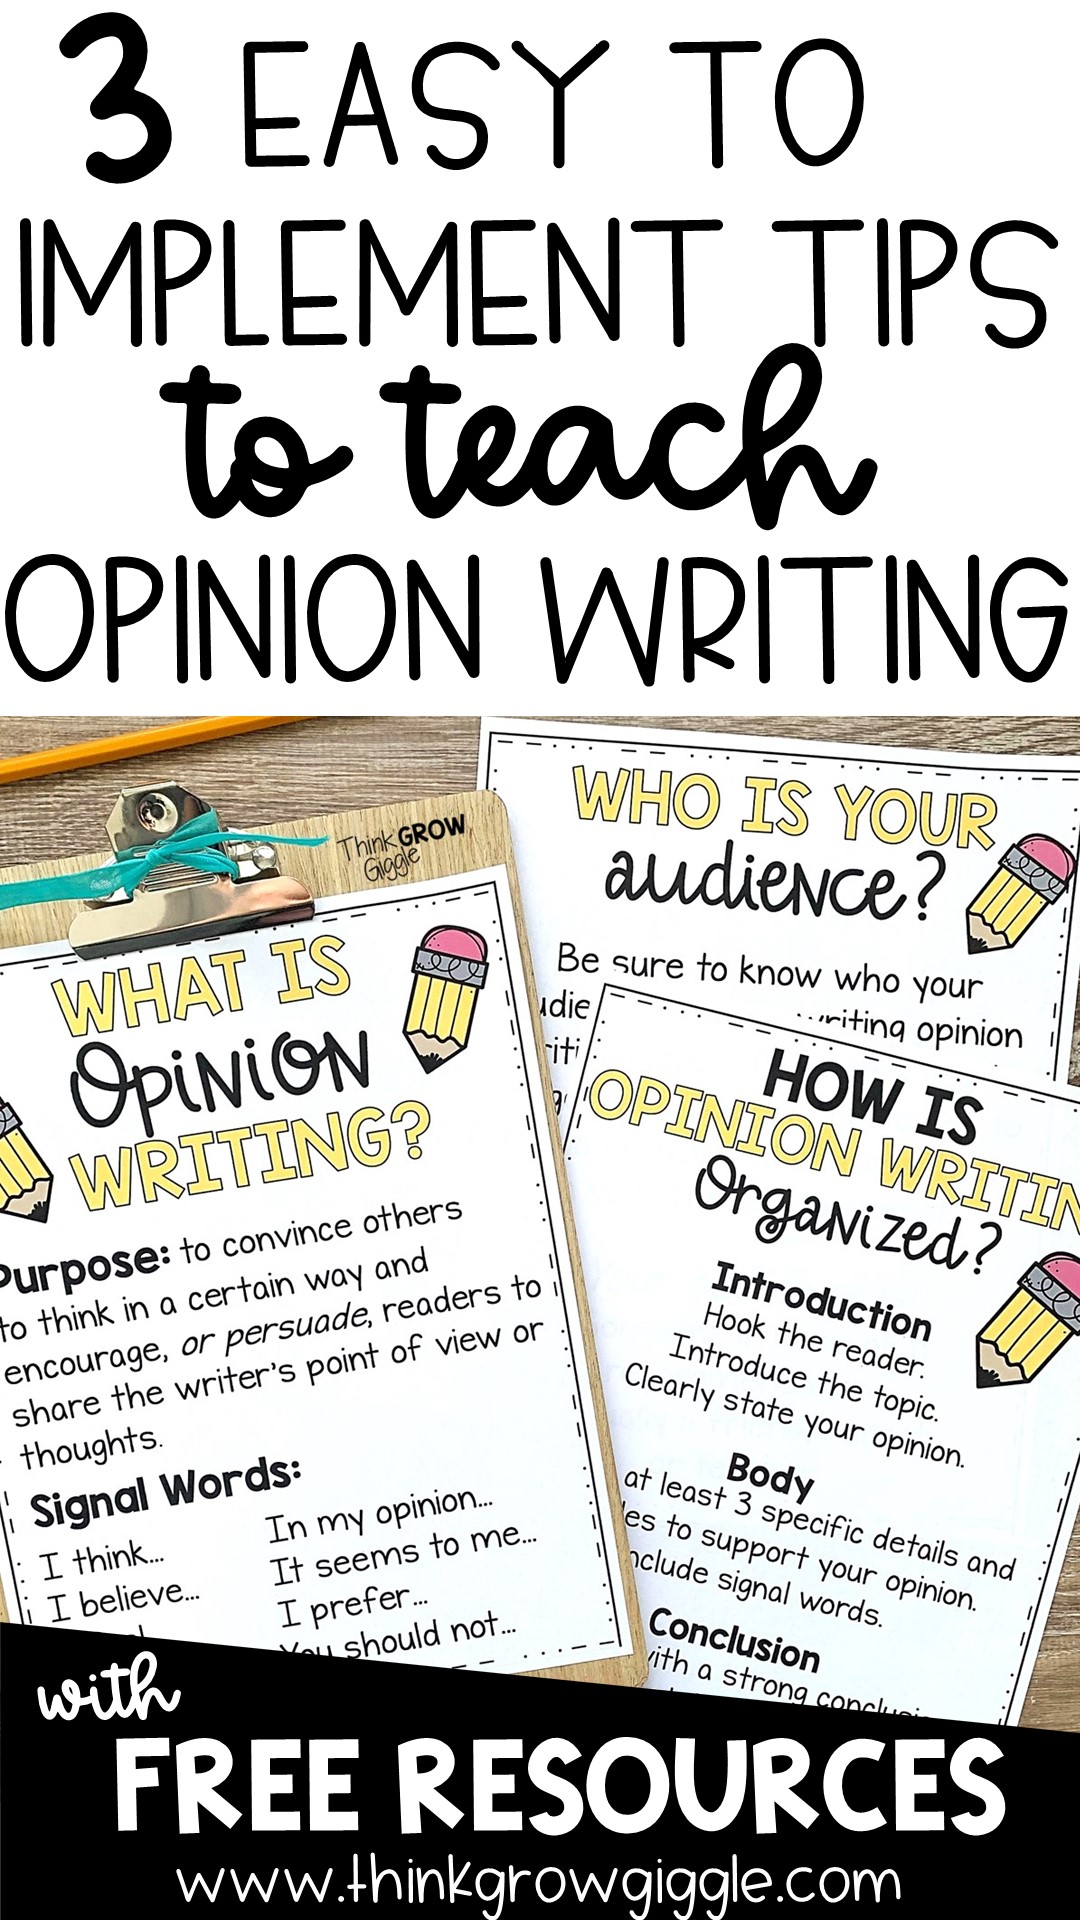 How to Write an Opinion Piece (with Pictures) - wikiHow